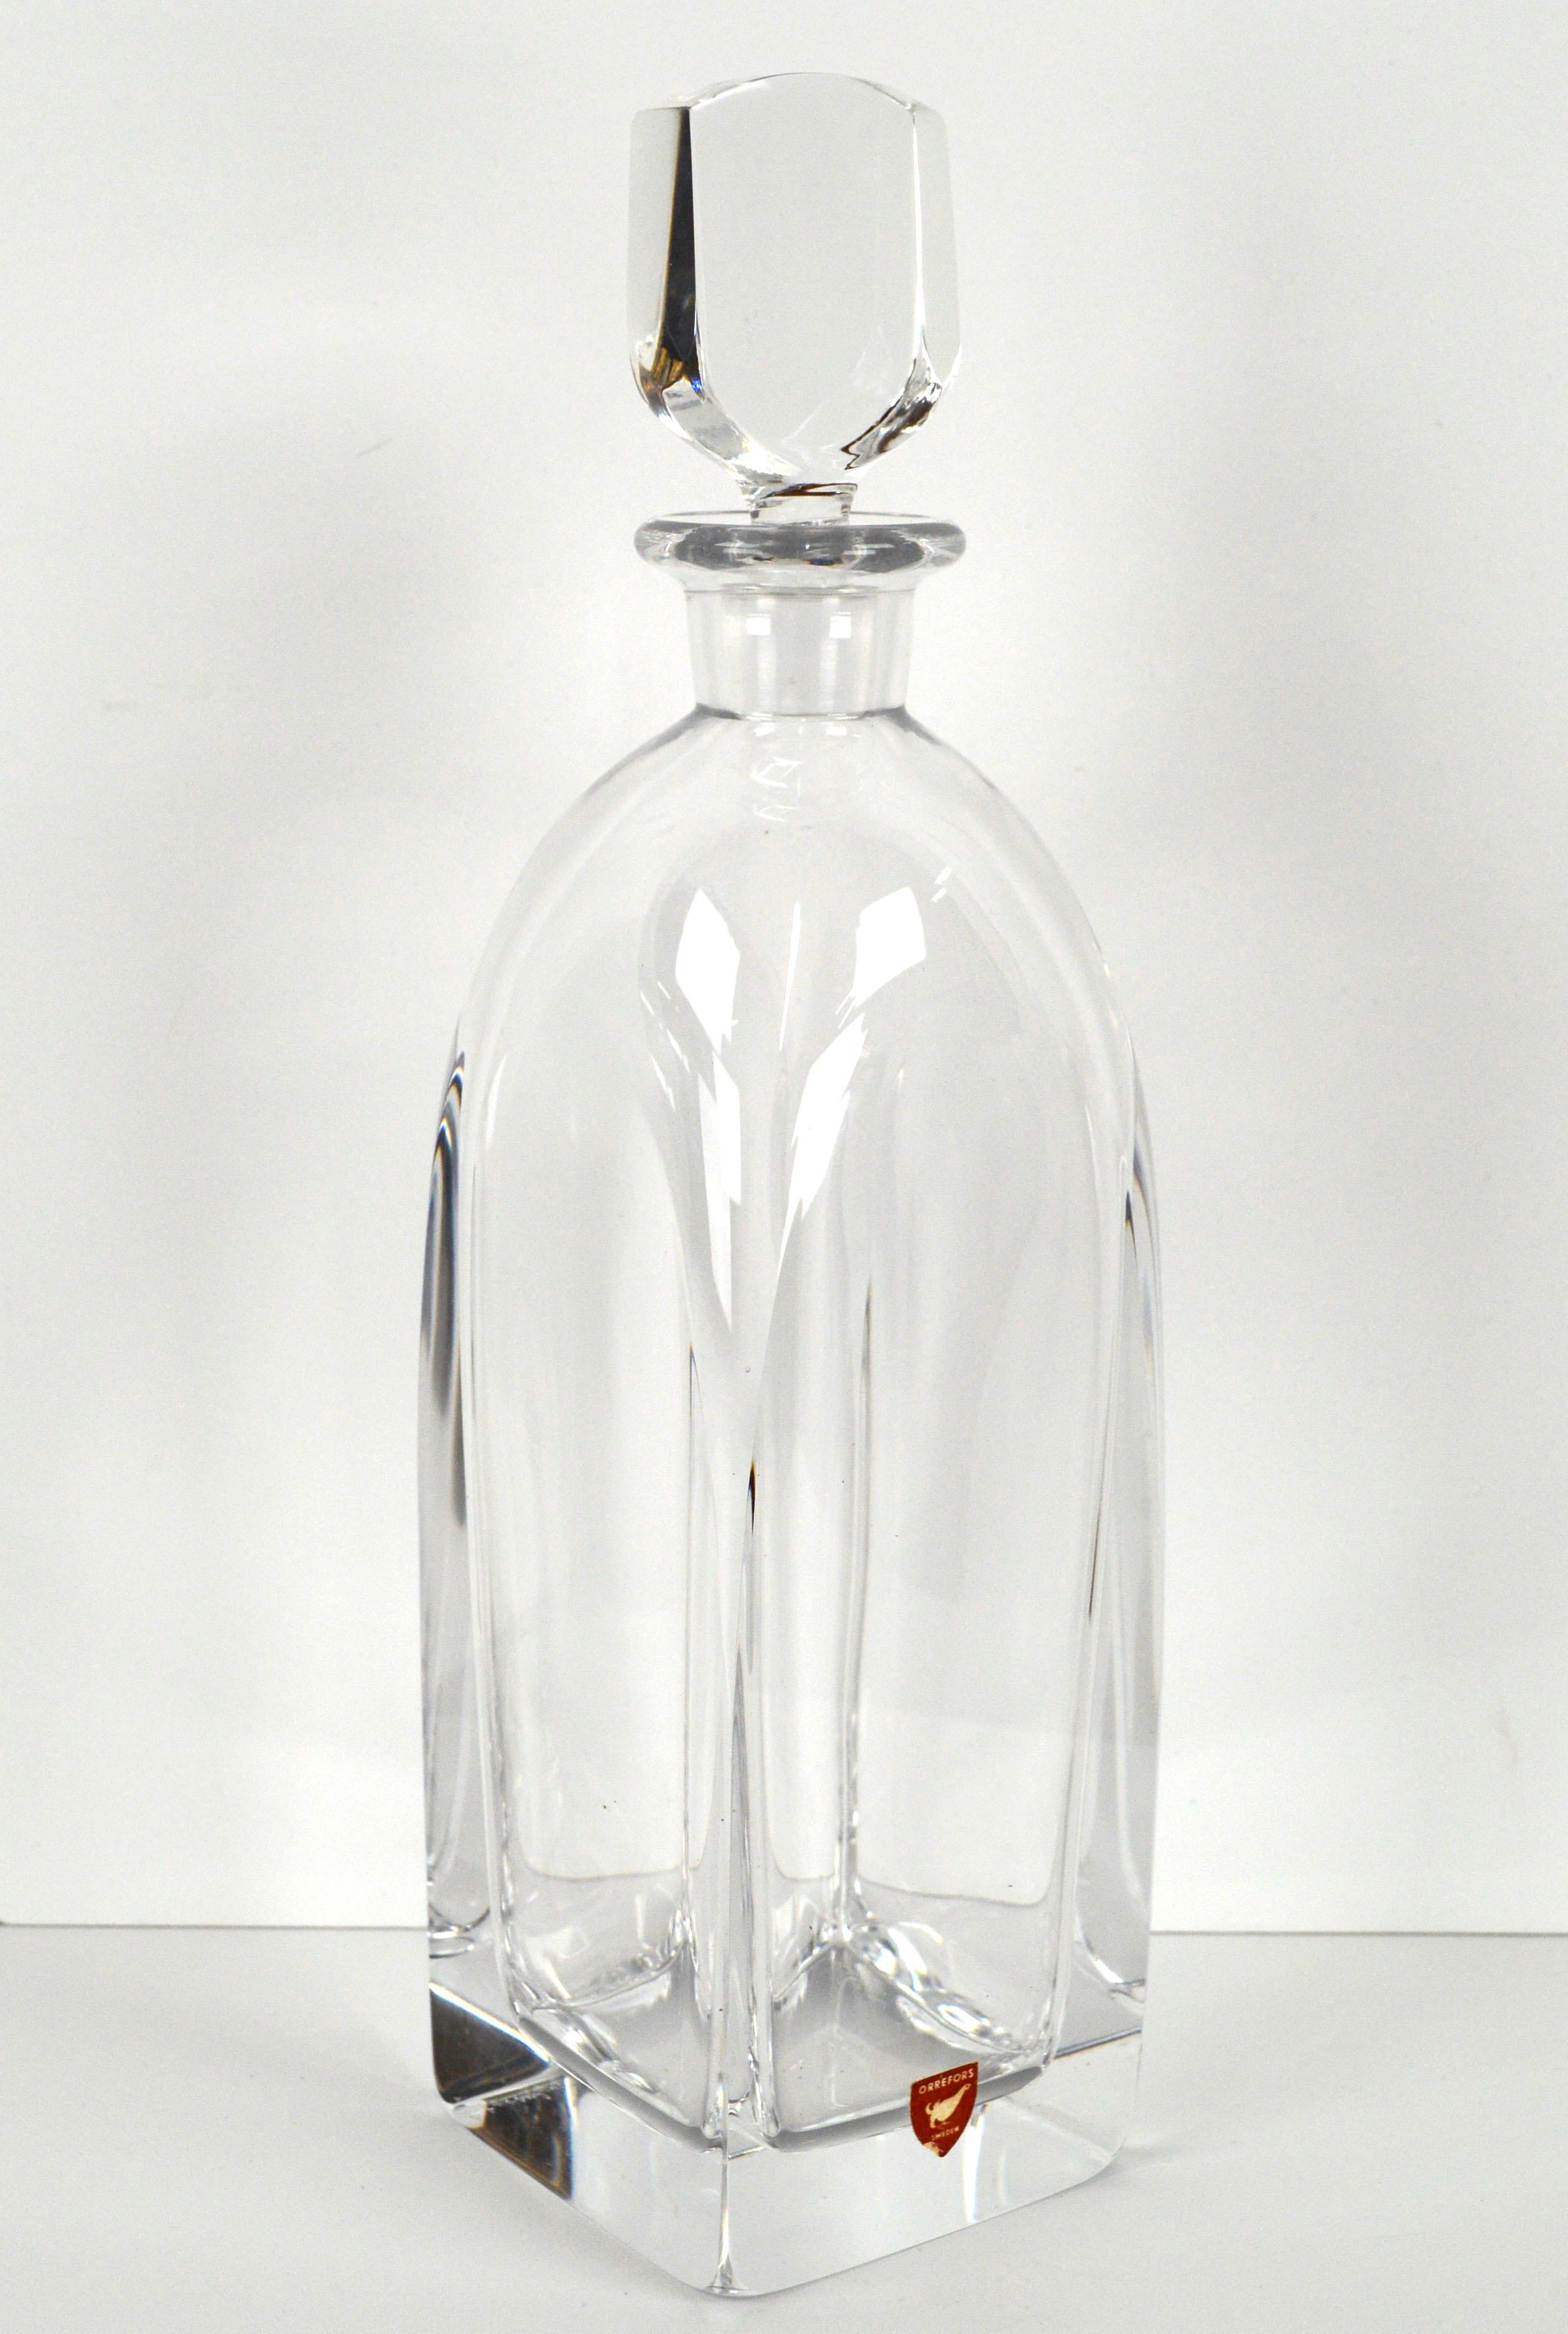 Vintage LG clear solid Glass crystal bottle decanter Stopper 3 1/2" tall #3 